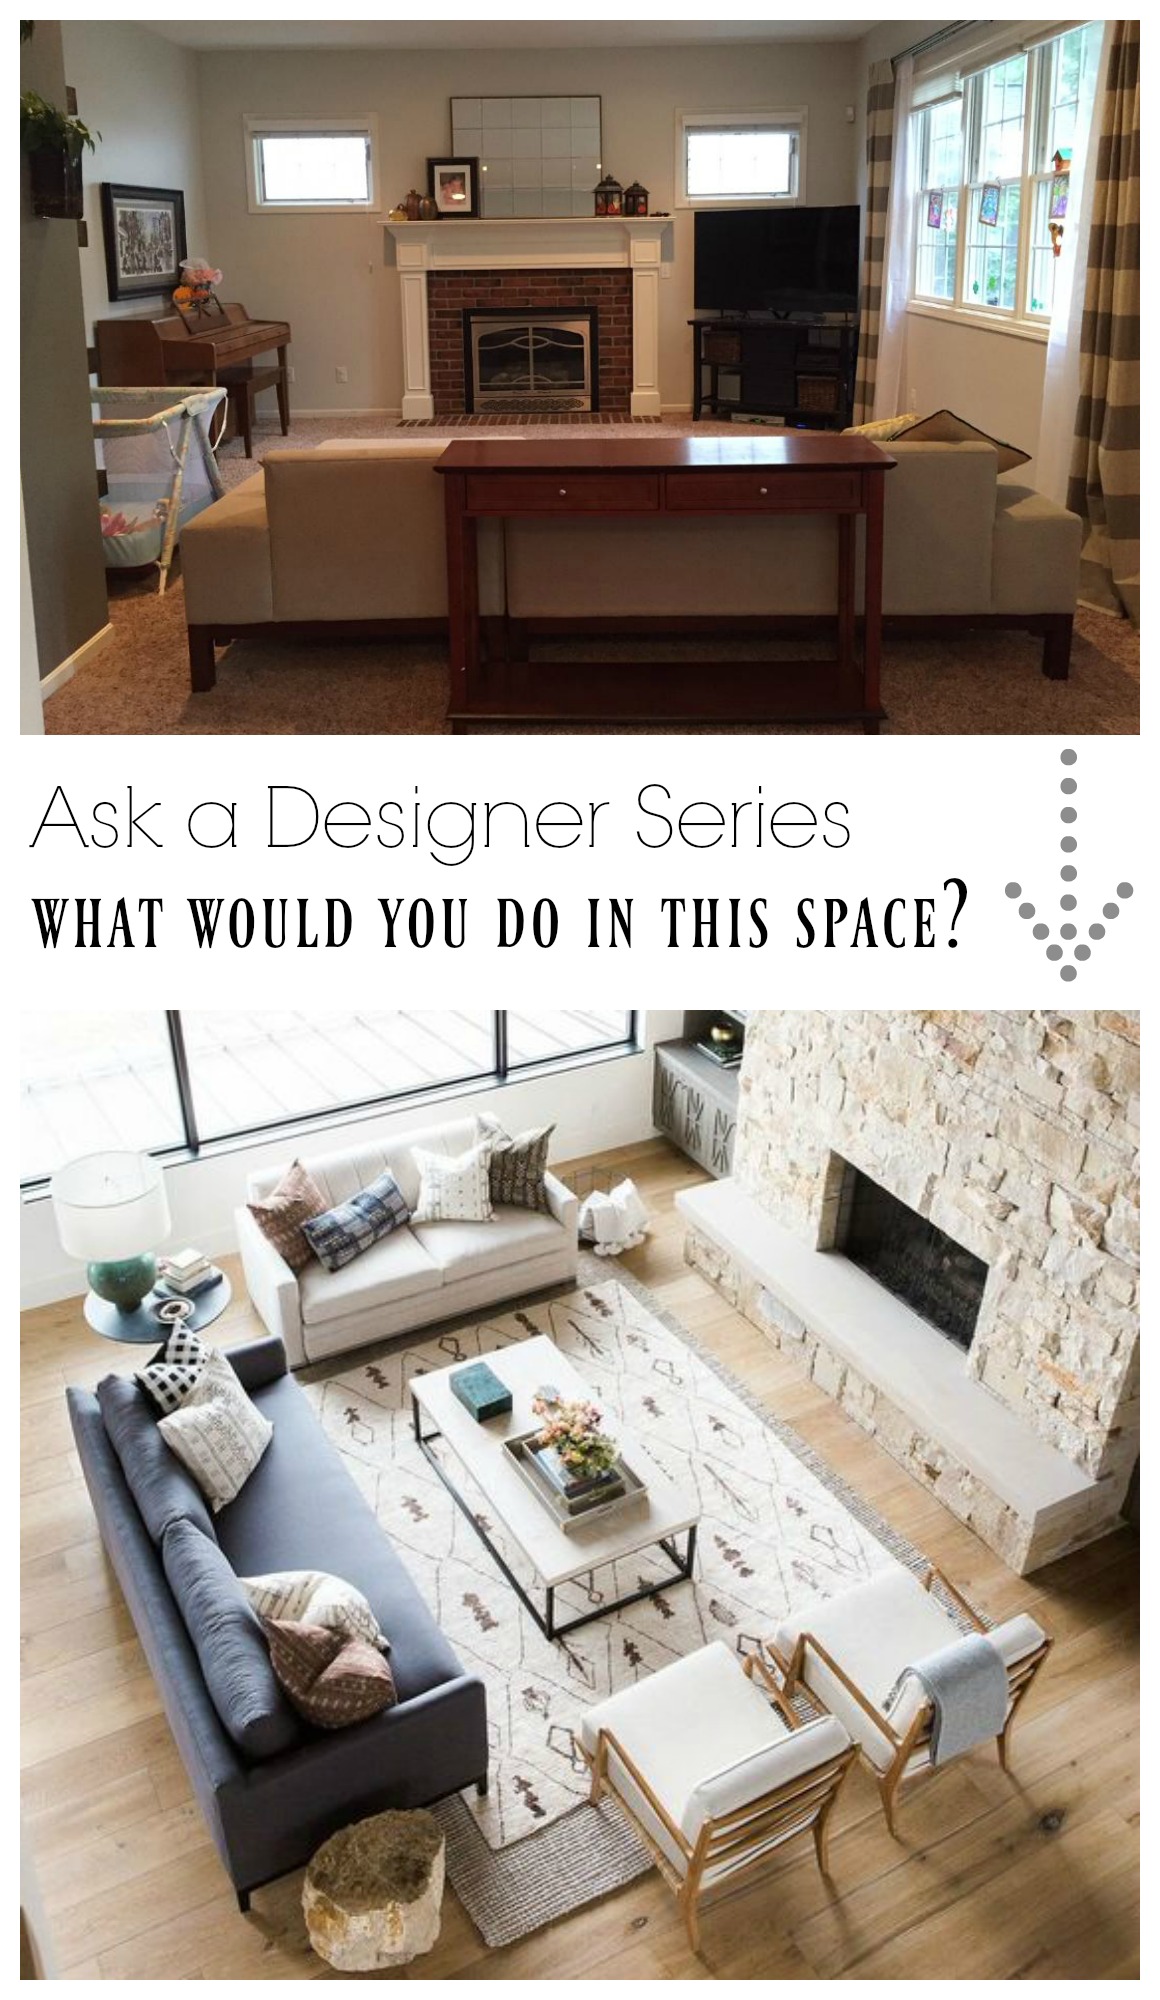 Ask a Designer Series- What would you do in this Family Room?